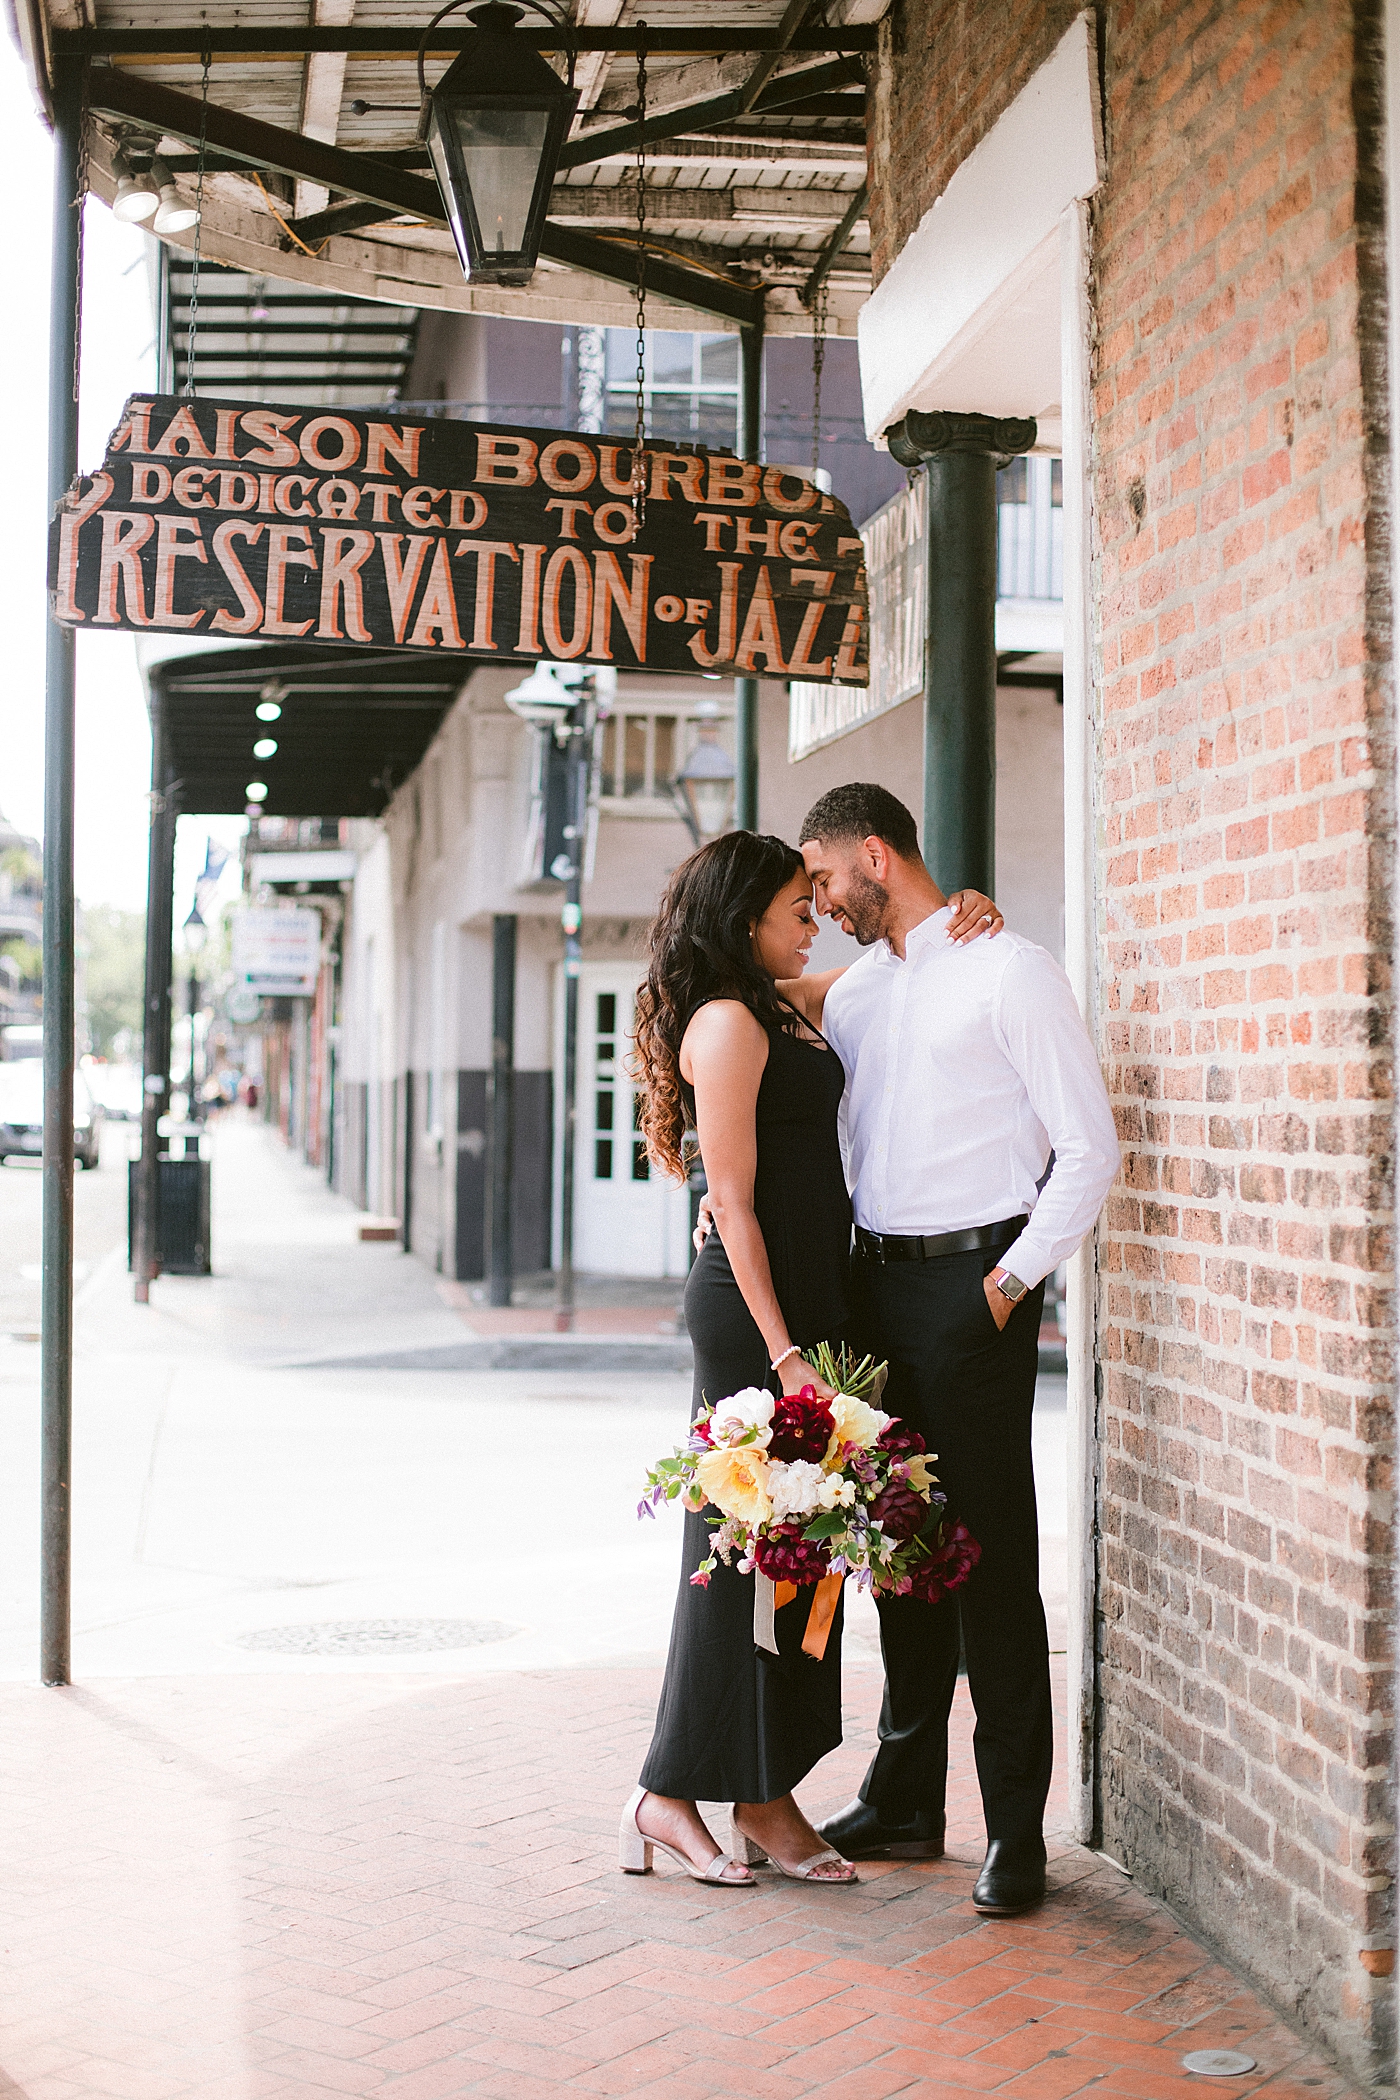 Couple snuggling on the sidewalk walking the french quarter | Photo by Hope Helmuth Photography